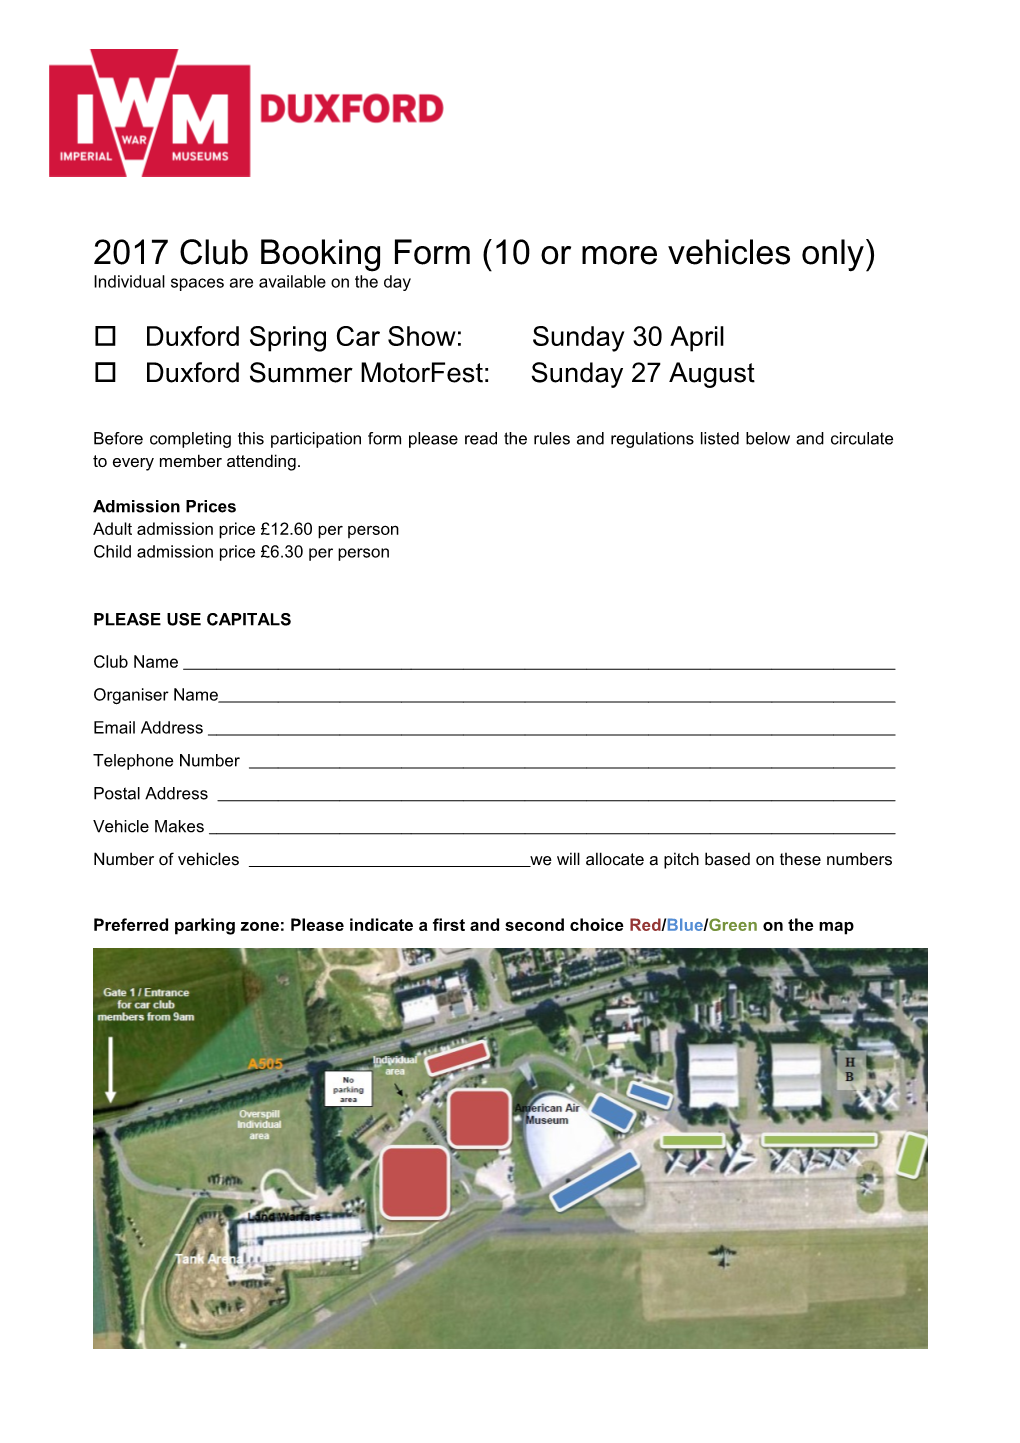 2017 Club Booking Form (10 Or More Vehicles Only)